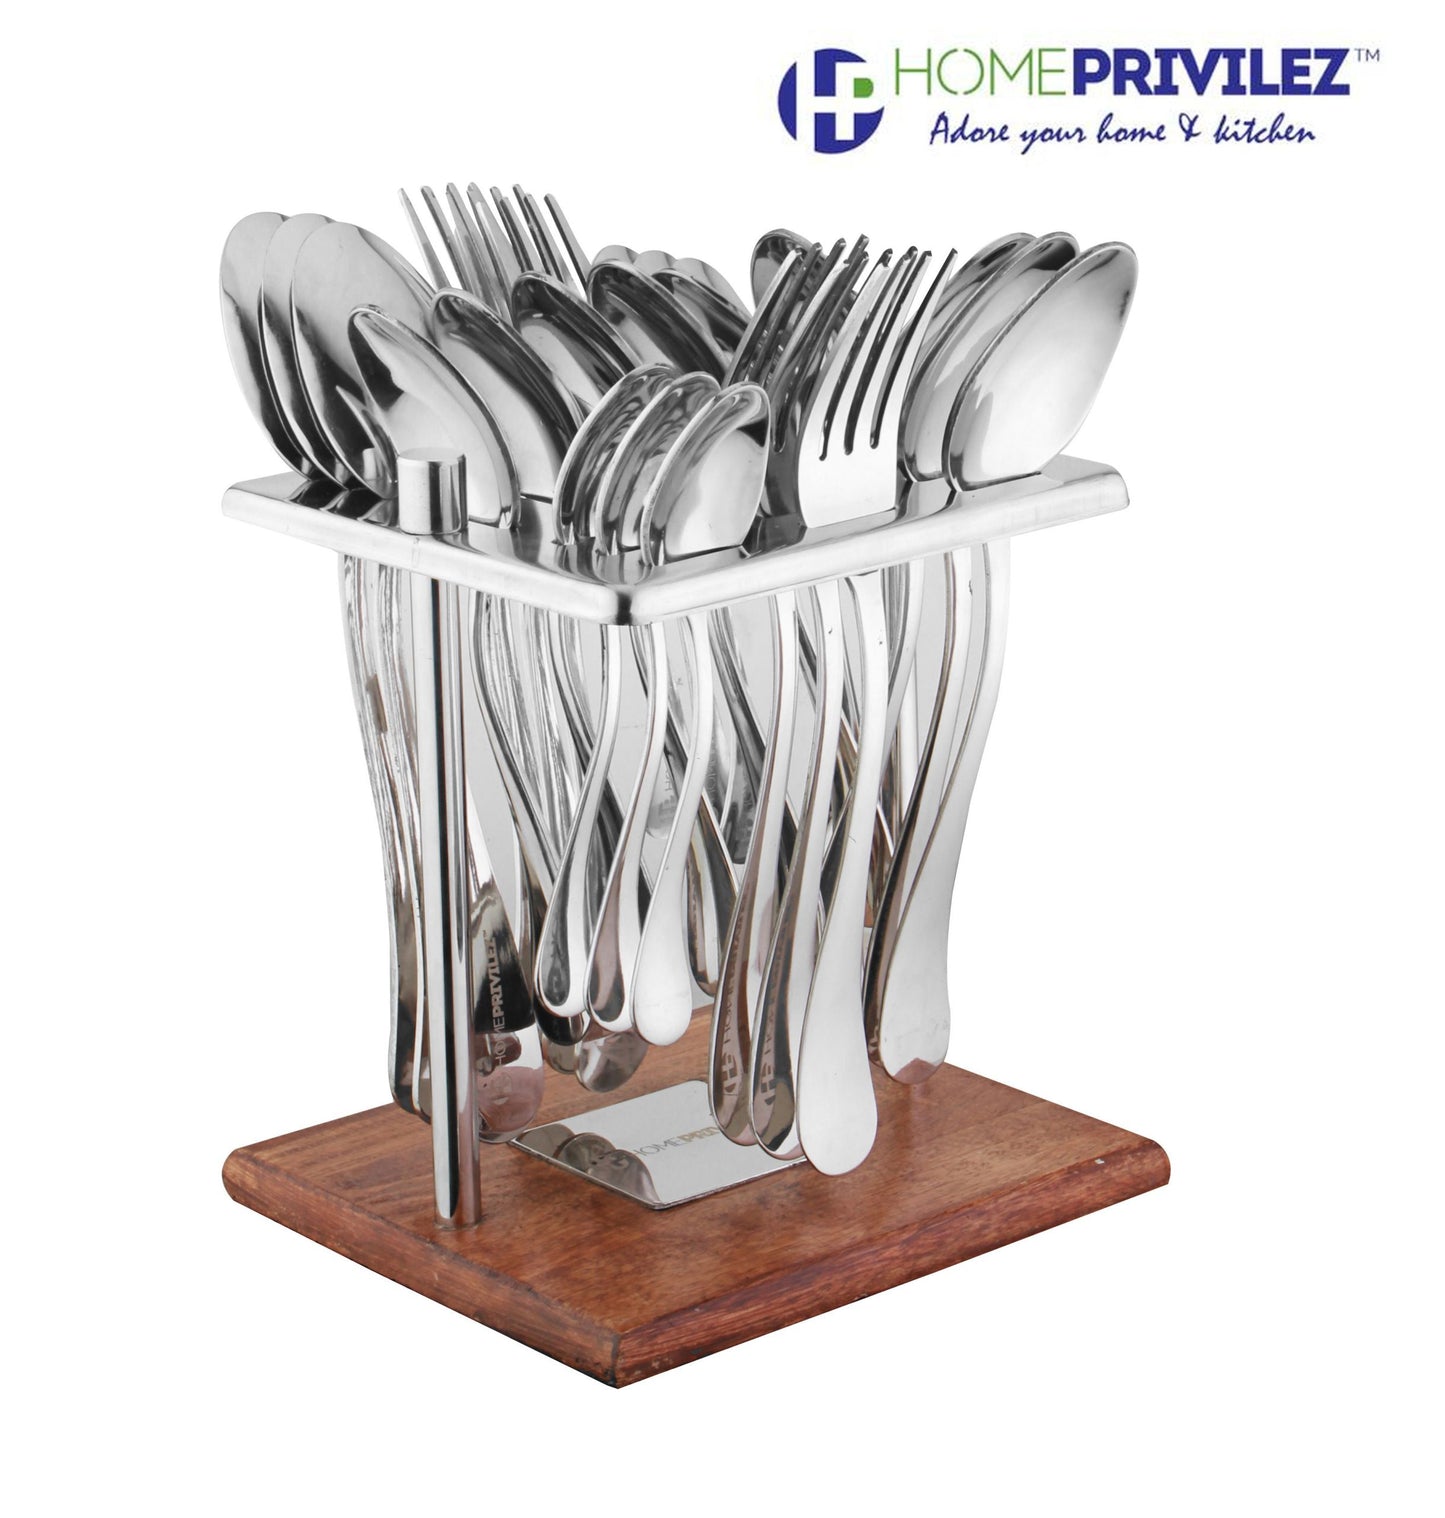 Tulip Cutlery - Stainless Steel 24pcs Cutlery in Stainless Steel stand with wooden base